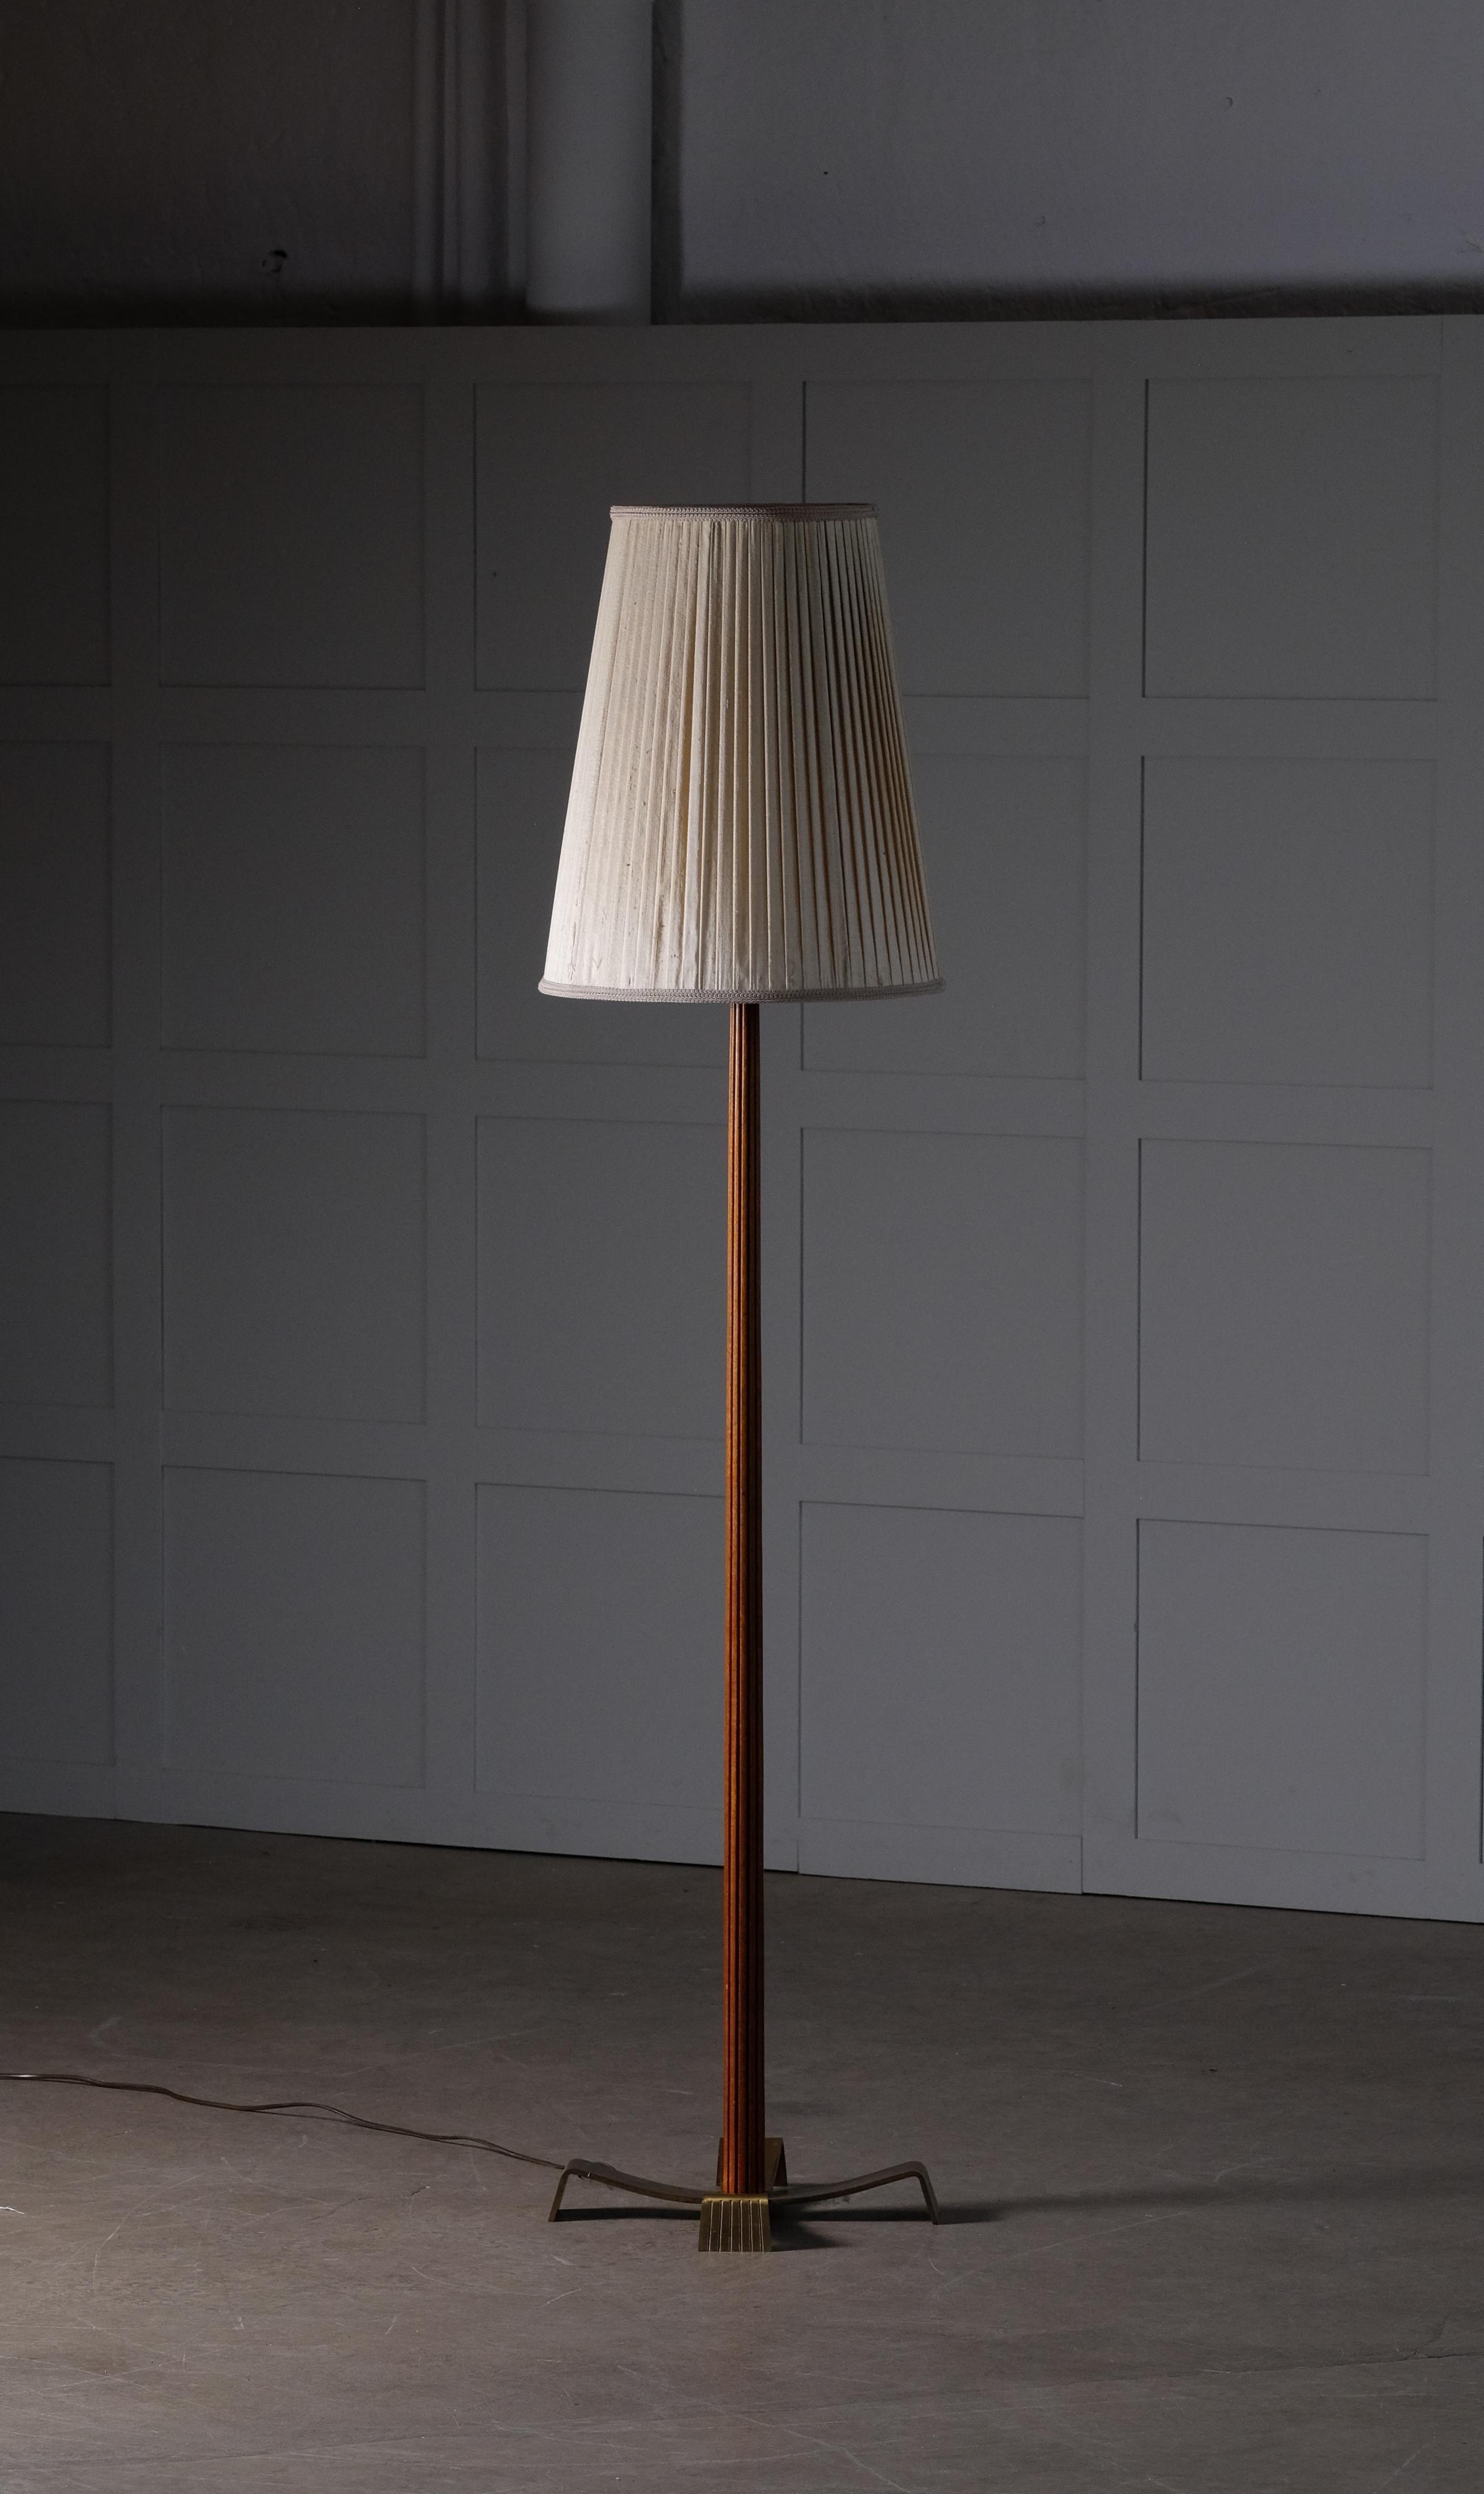 Rare model produced by Ateljé Lyktan, Sweden, 1940s.
Fluted mahogany shaft with brass foot. Uplight and three light points down.